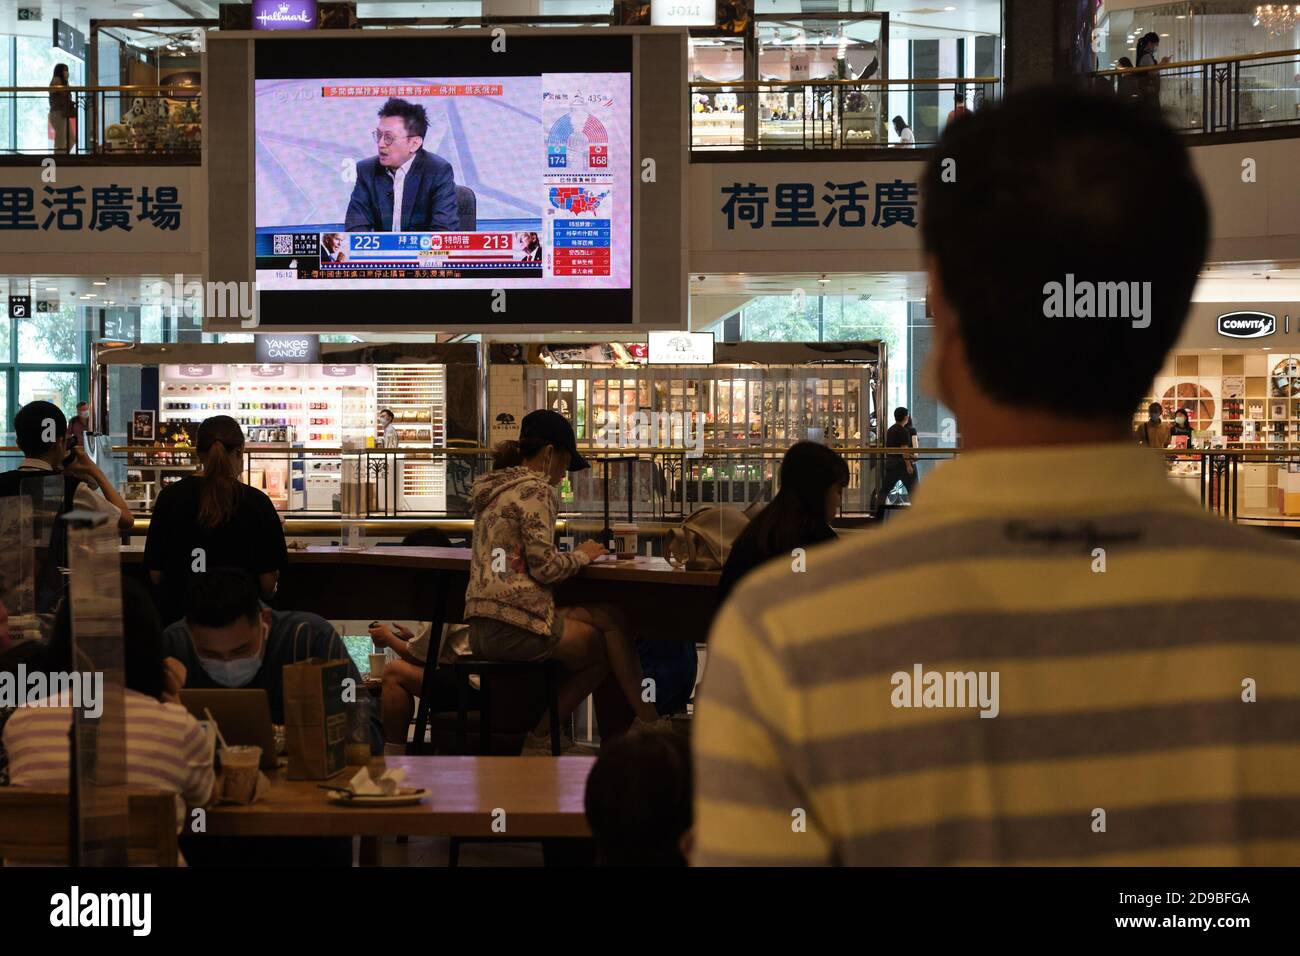 A man watches the live news of the US Presidential elections showing on a TV screen at a shopping mall in Hong Kong. Stock Photo